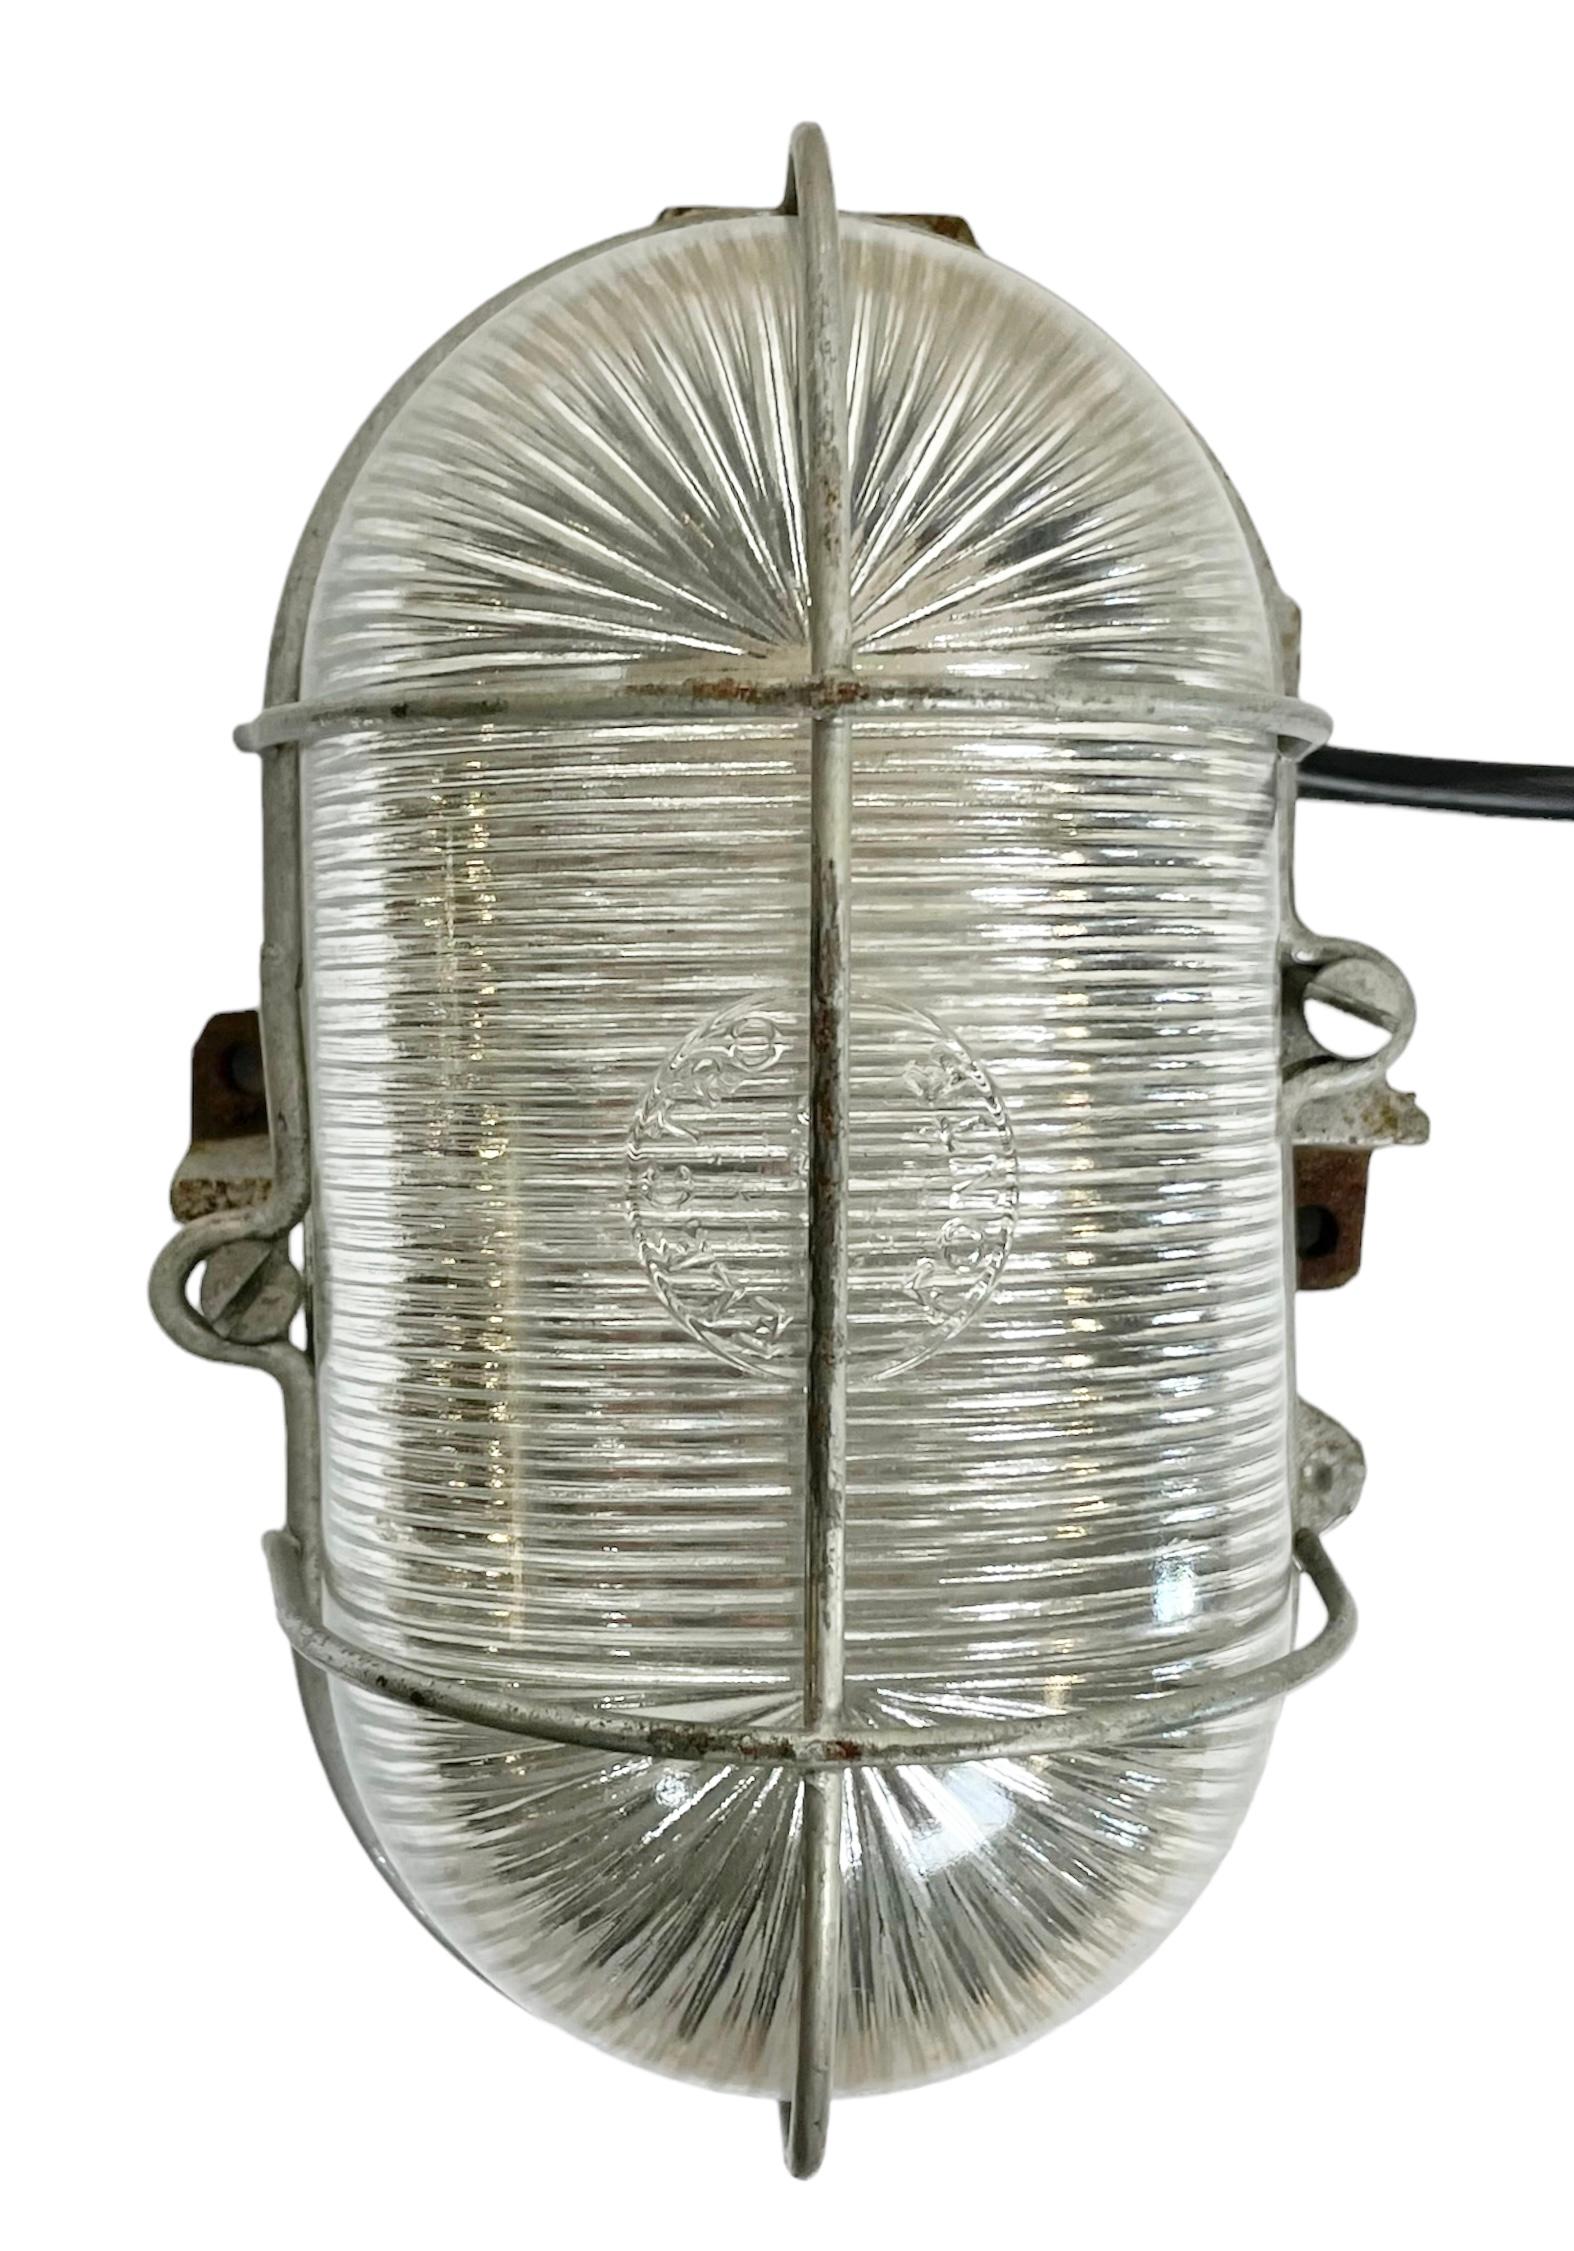 Industrial wall light made by Elecktro Fonte Paris in France during the 1960s. It features a cast iron body, a stripped glass and a steel grid.The socket requires E 27/ E26 light bulbs. New wire. The weight of the lamp is 1,5 kg.